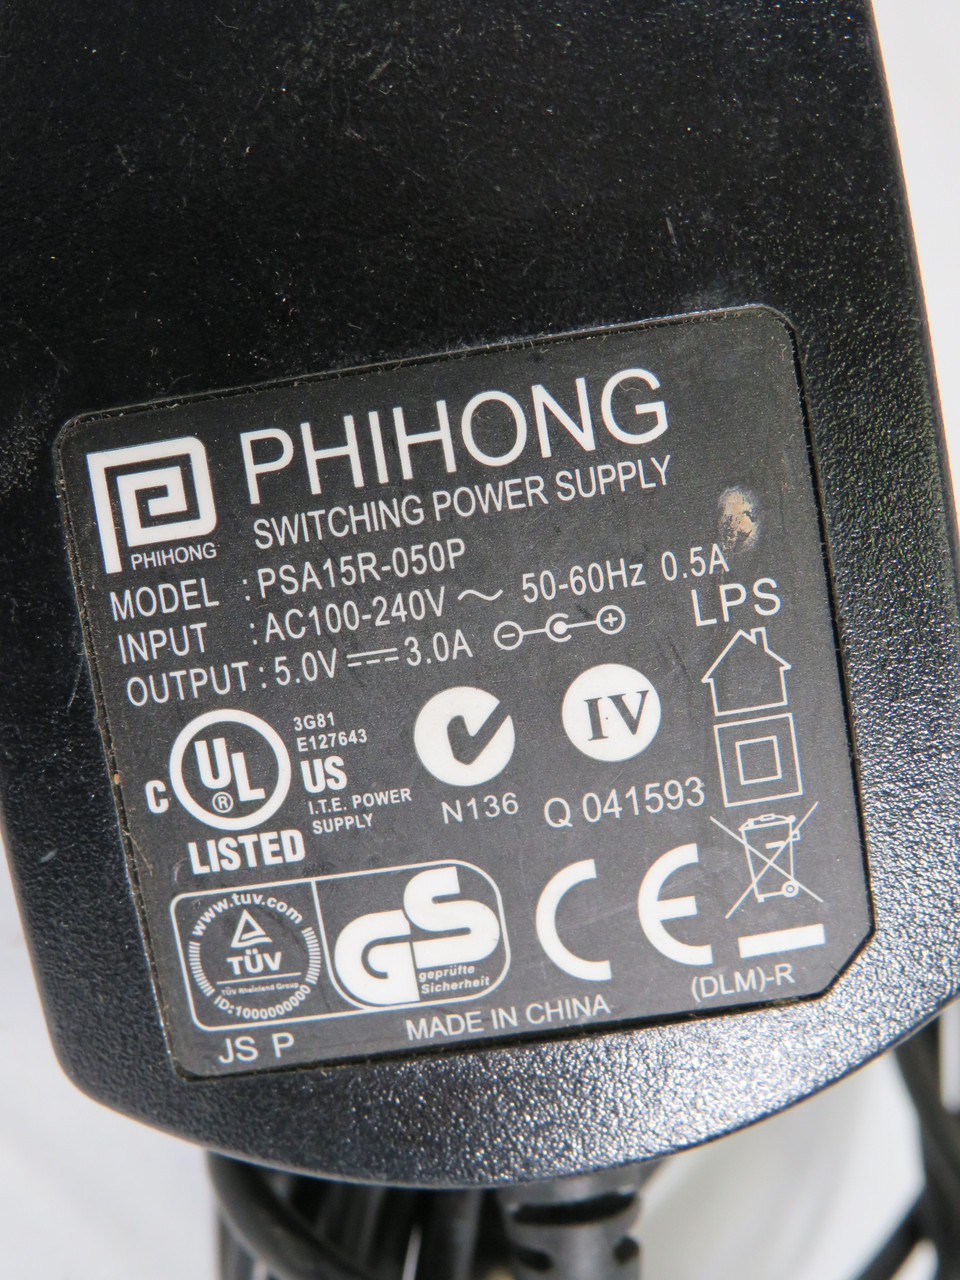 Phihong PSA15R-050P Switching Power Supply Output 5.0V 3.0A Input 100-240V USED